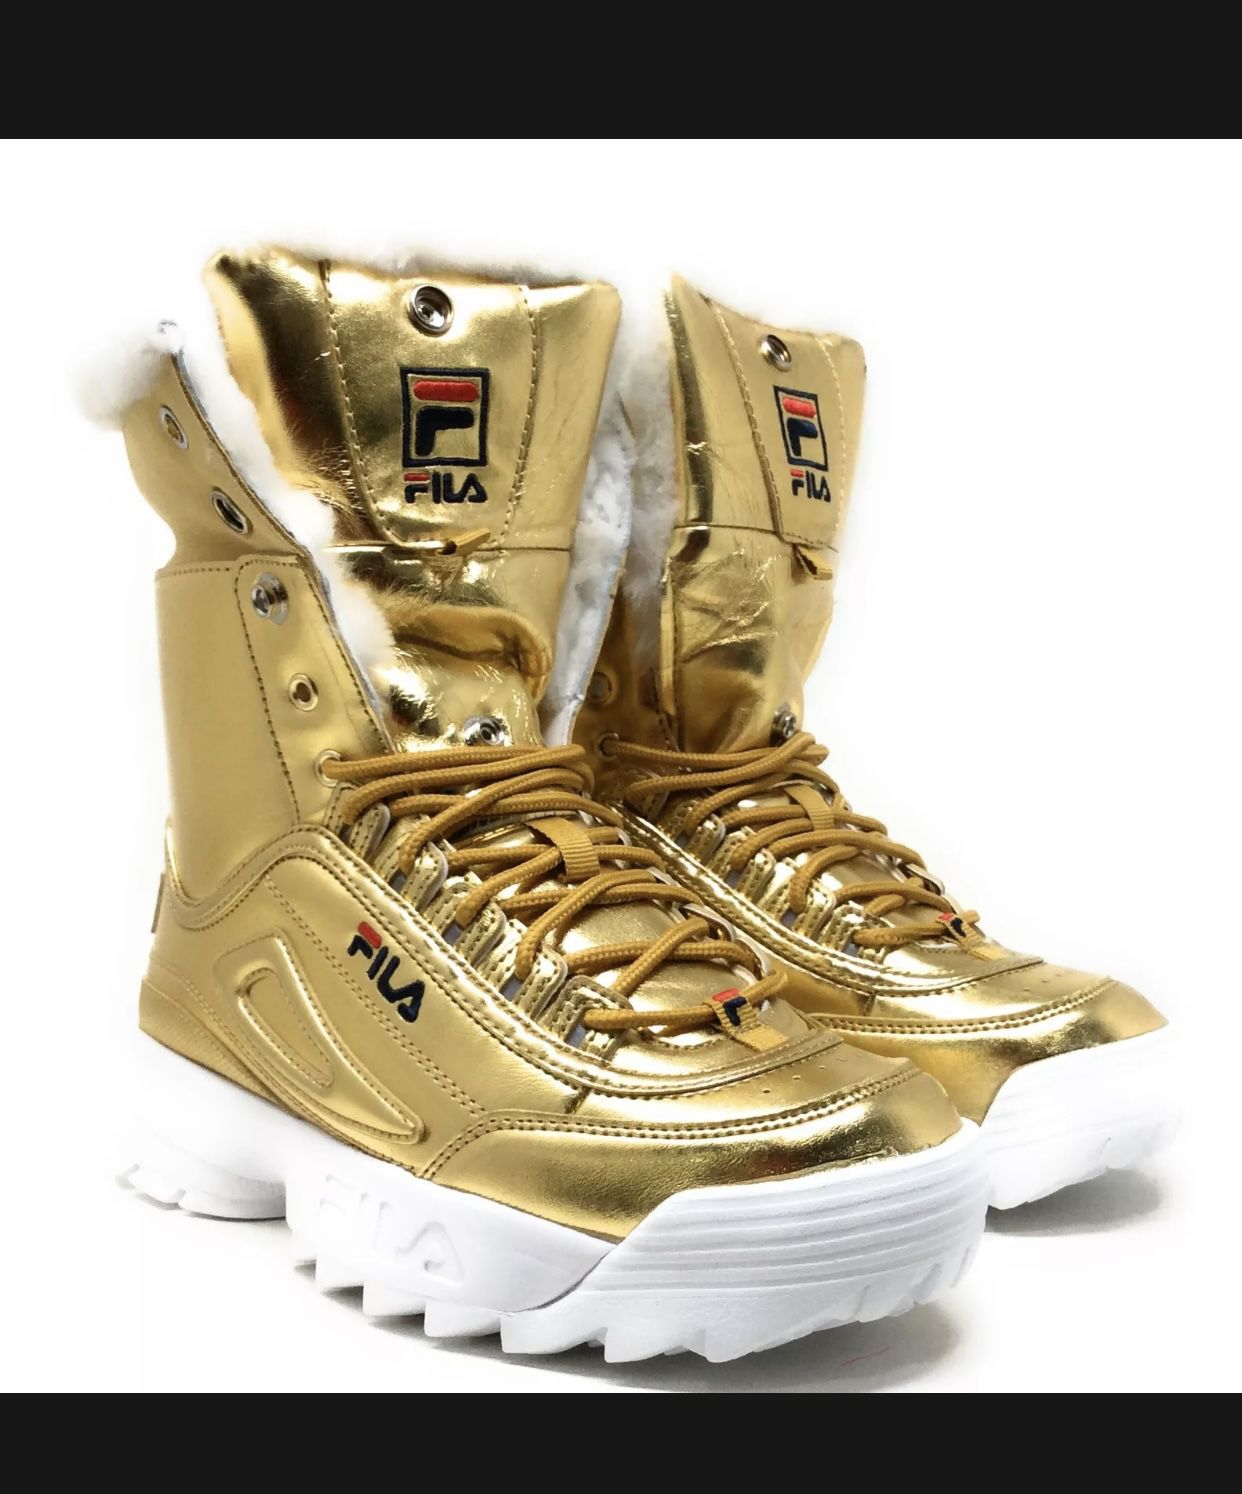 Fila Girls Disruptor Shearling Fur Lined Winter Boots Fold Over Gold Size 2. Used Condition. Make an offer!